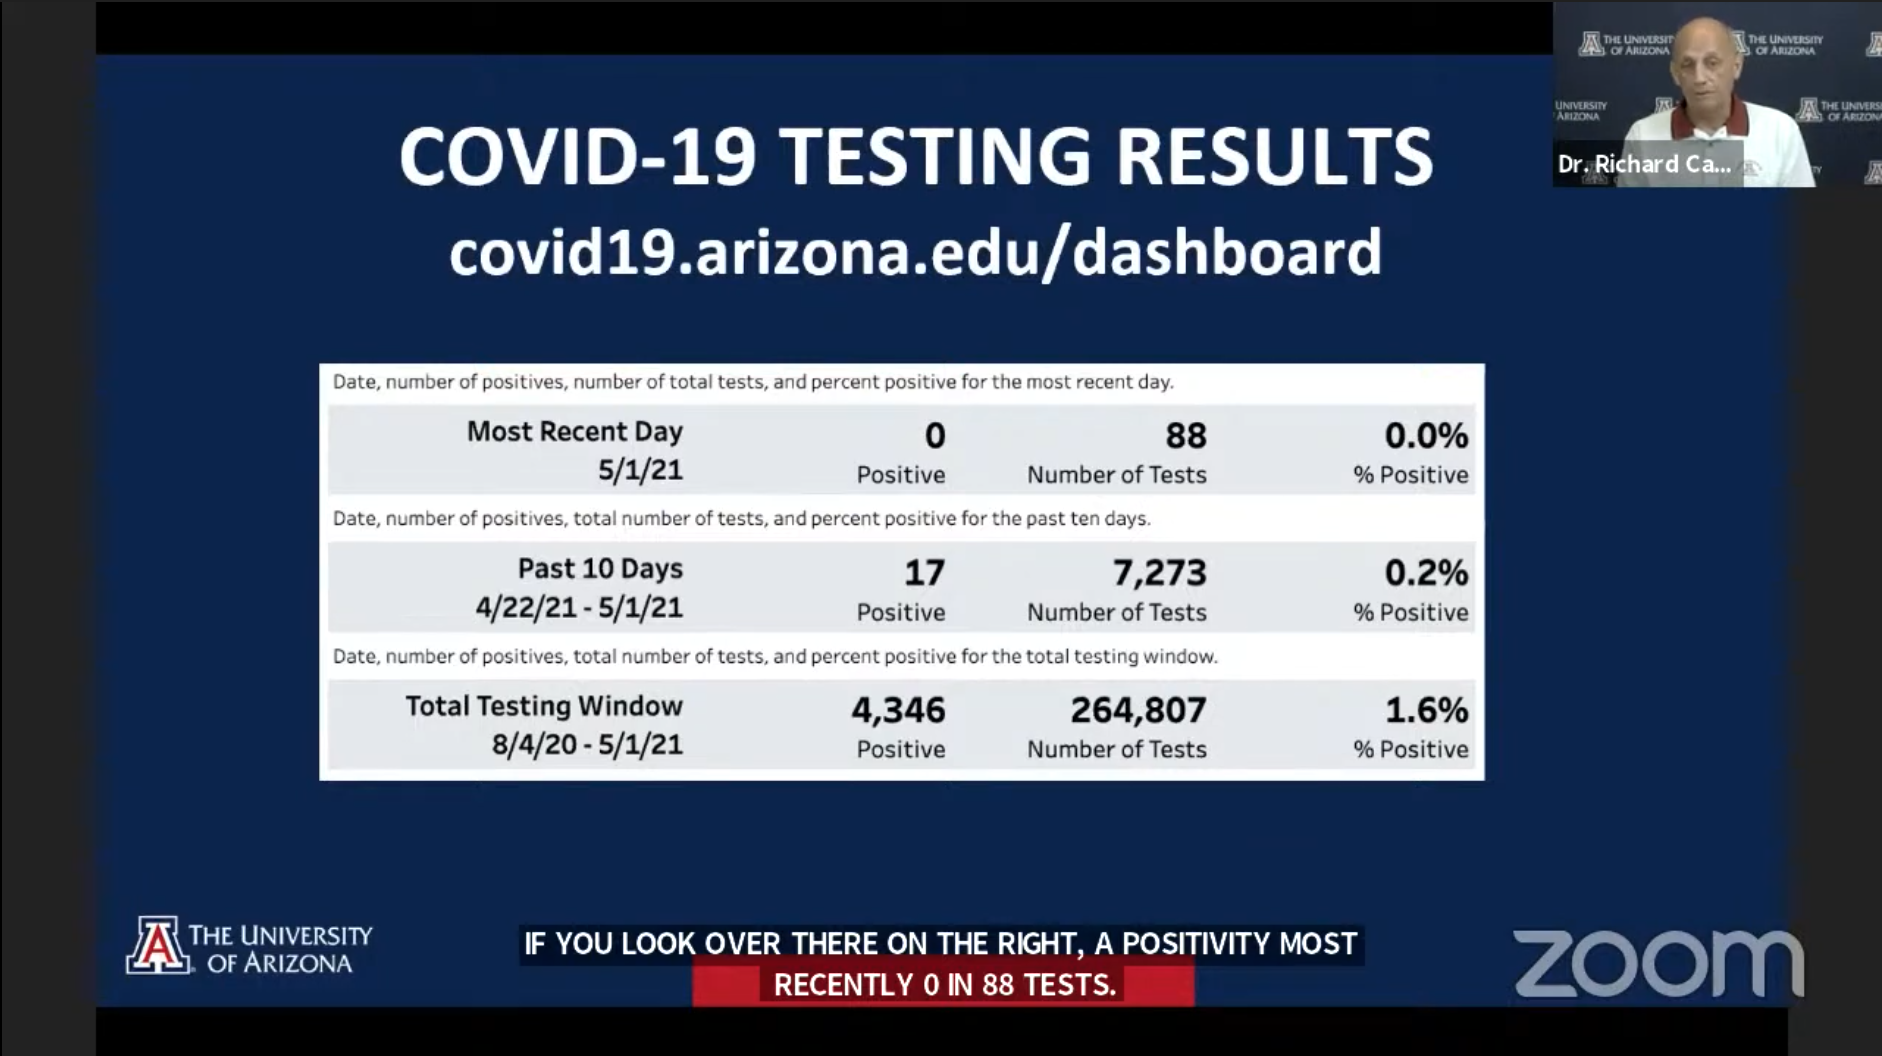 Screenshot of recent COVID-19 testing data, reflecting a 0.2% positivity rate out of over 7,200 tests conducted.